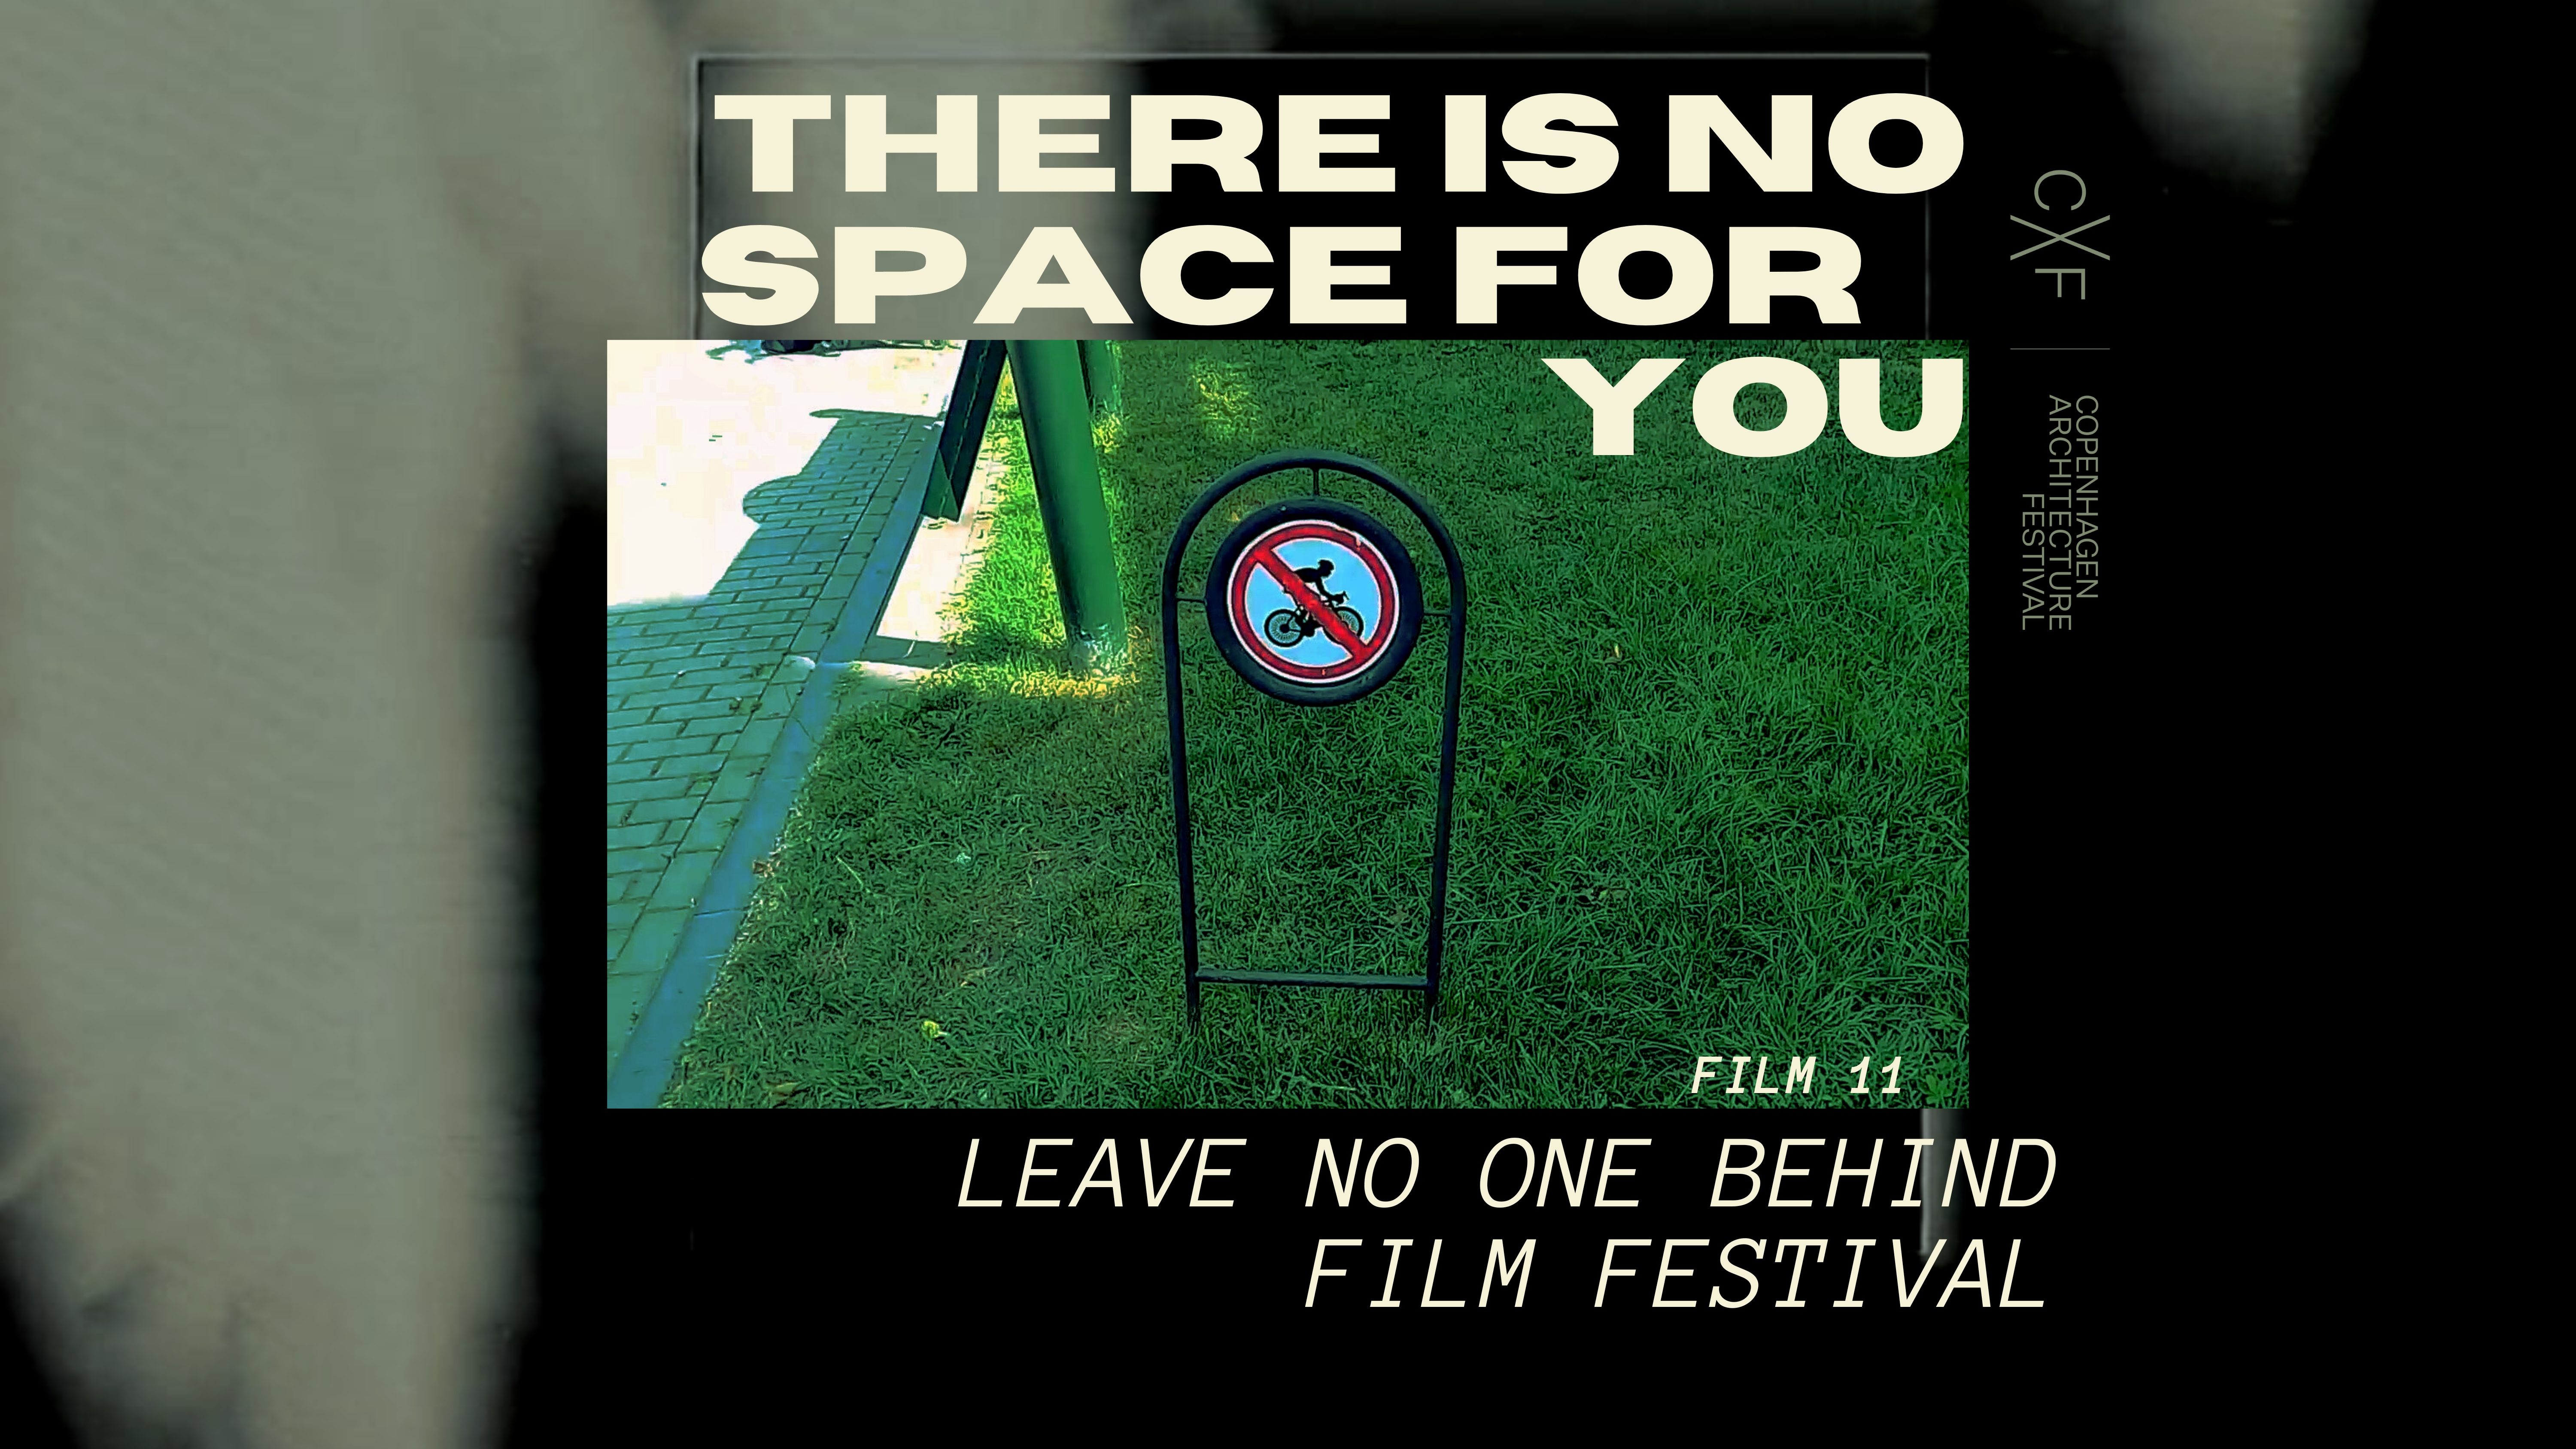 LNOB Film 11: “There is no space for you”